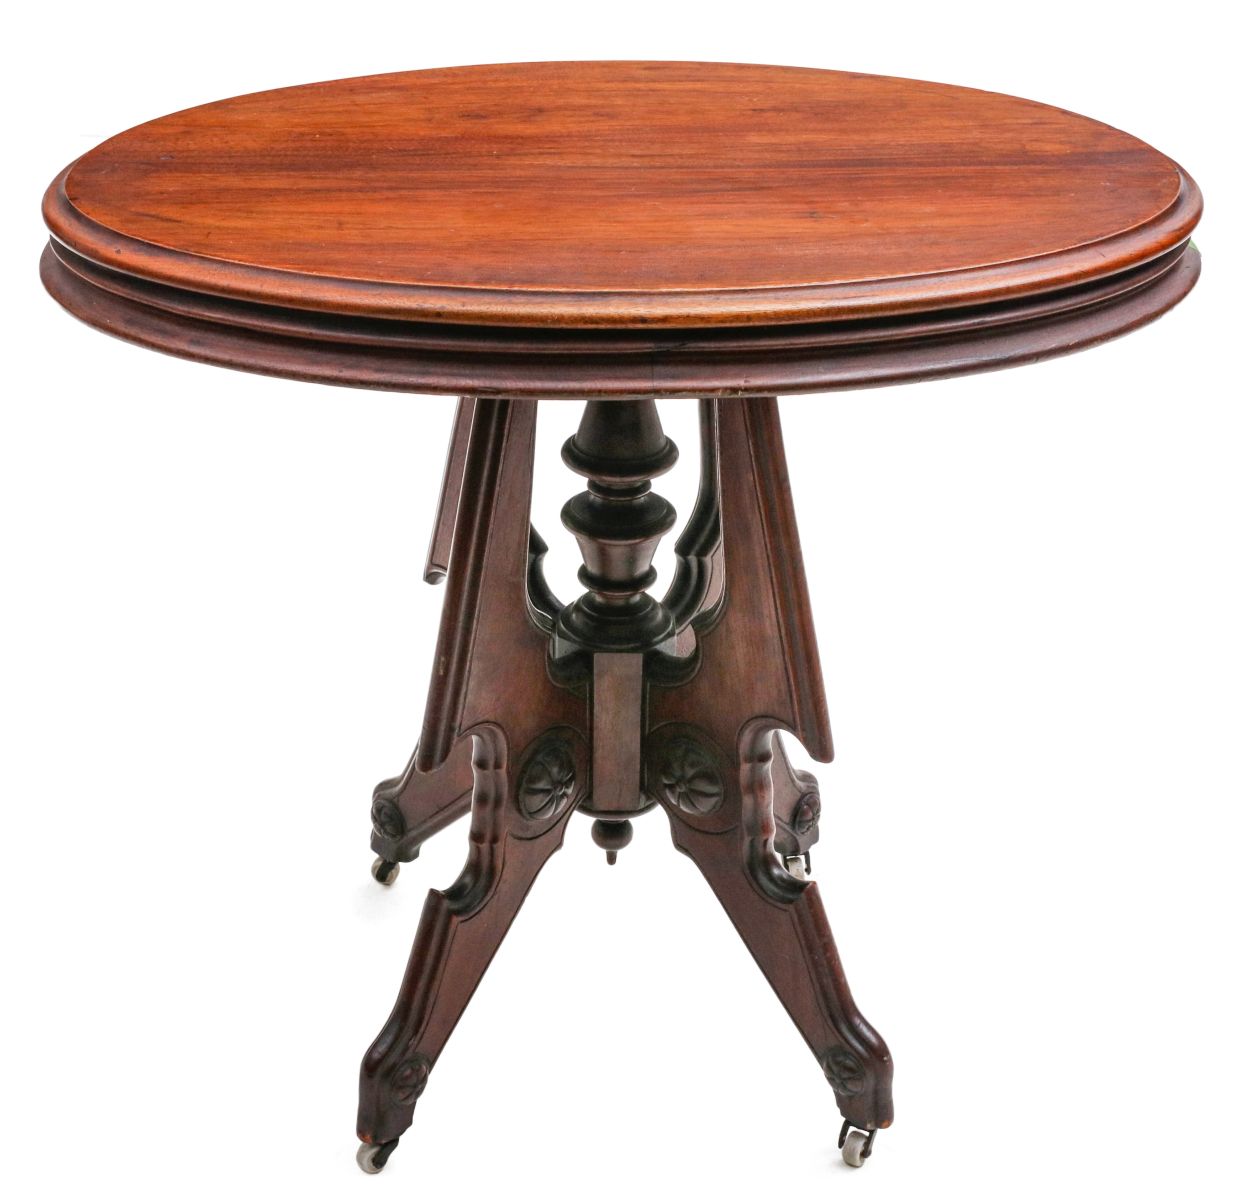 A 19TH C. WALNUT VICTORIAN PARLOR TABLE WITH OVAL TOP